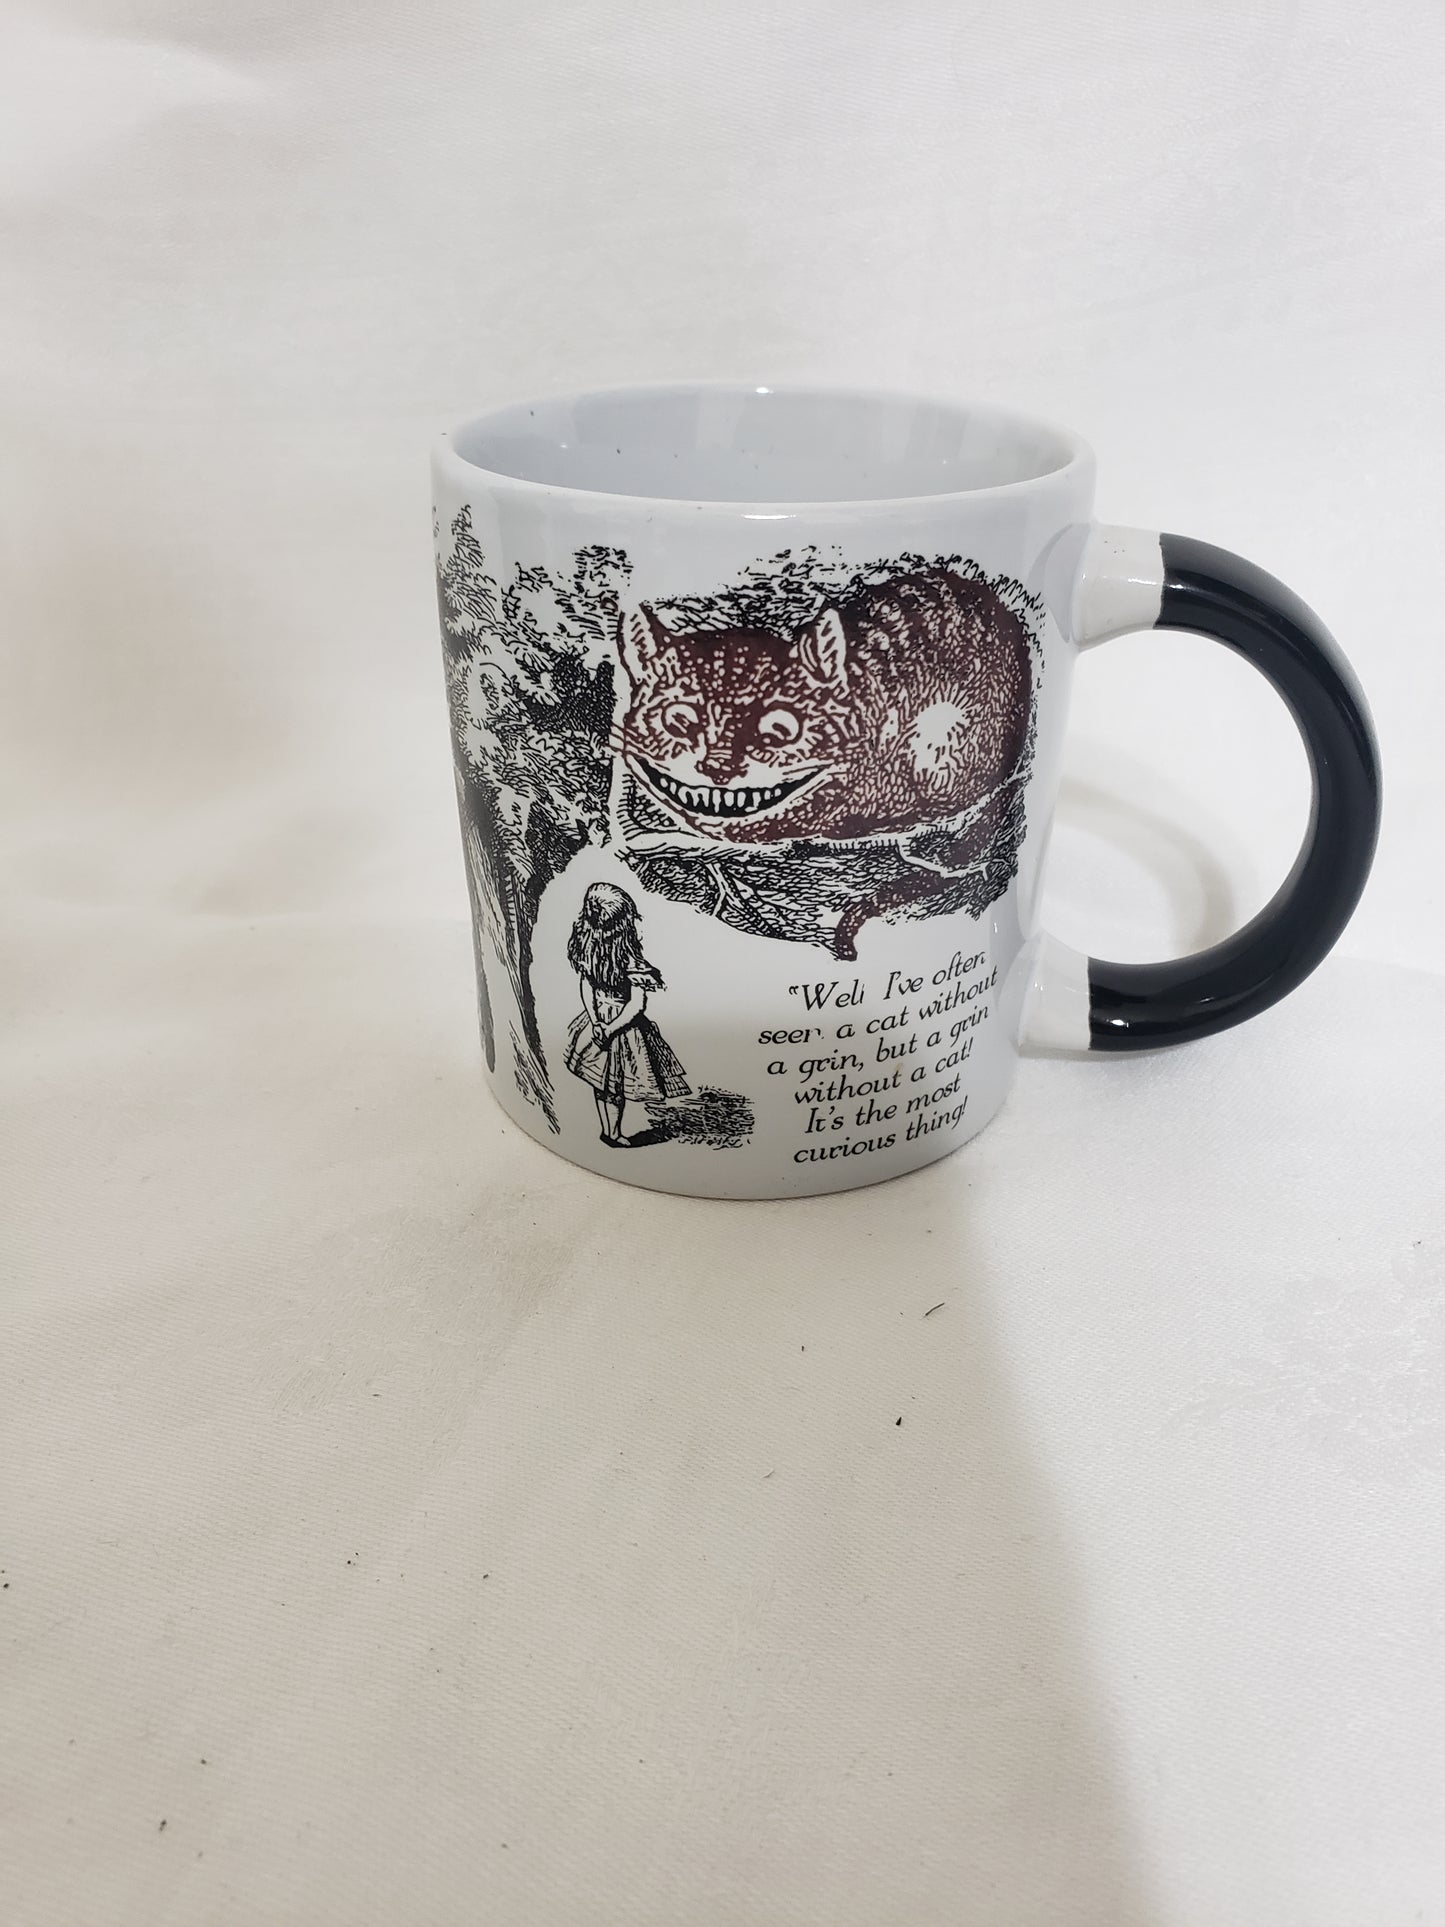 Mug - Cheshire Cat mug - "Well I've often seen a cat without a grin. It's the most curious cat."